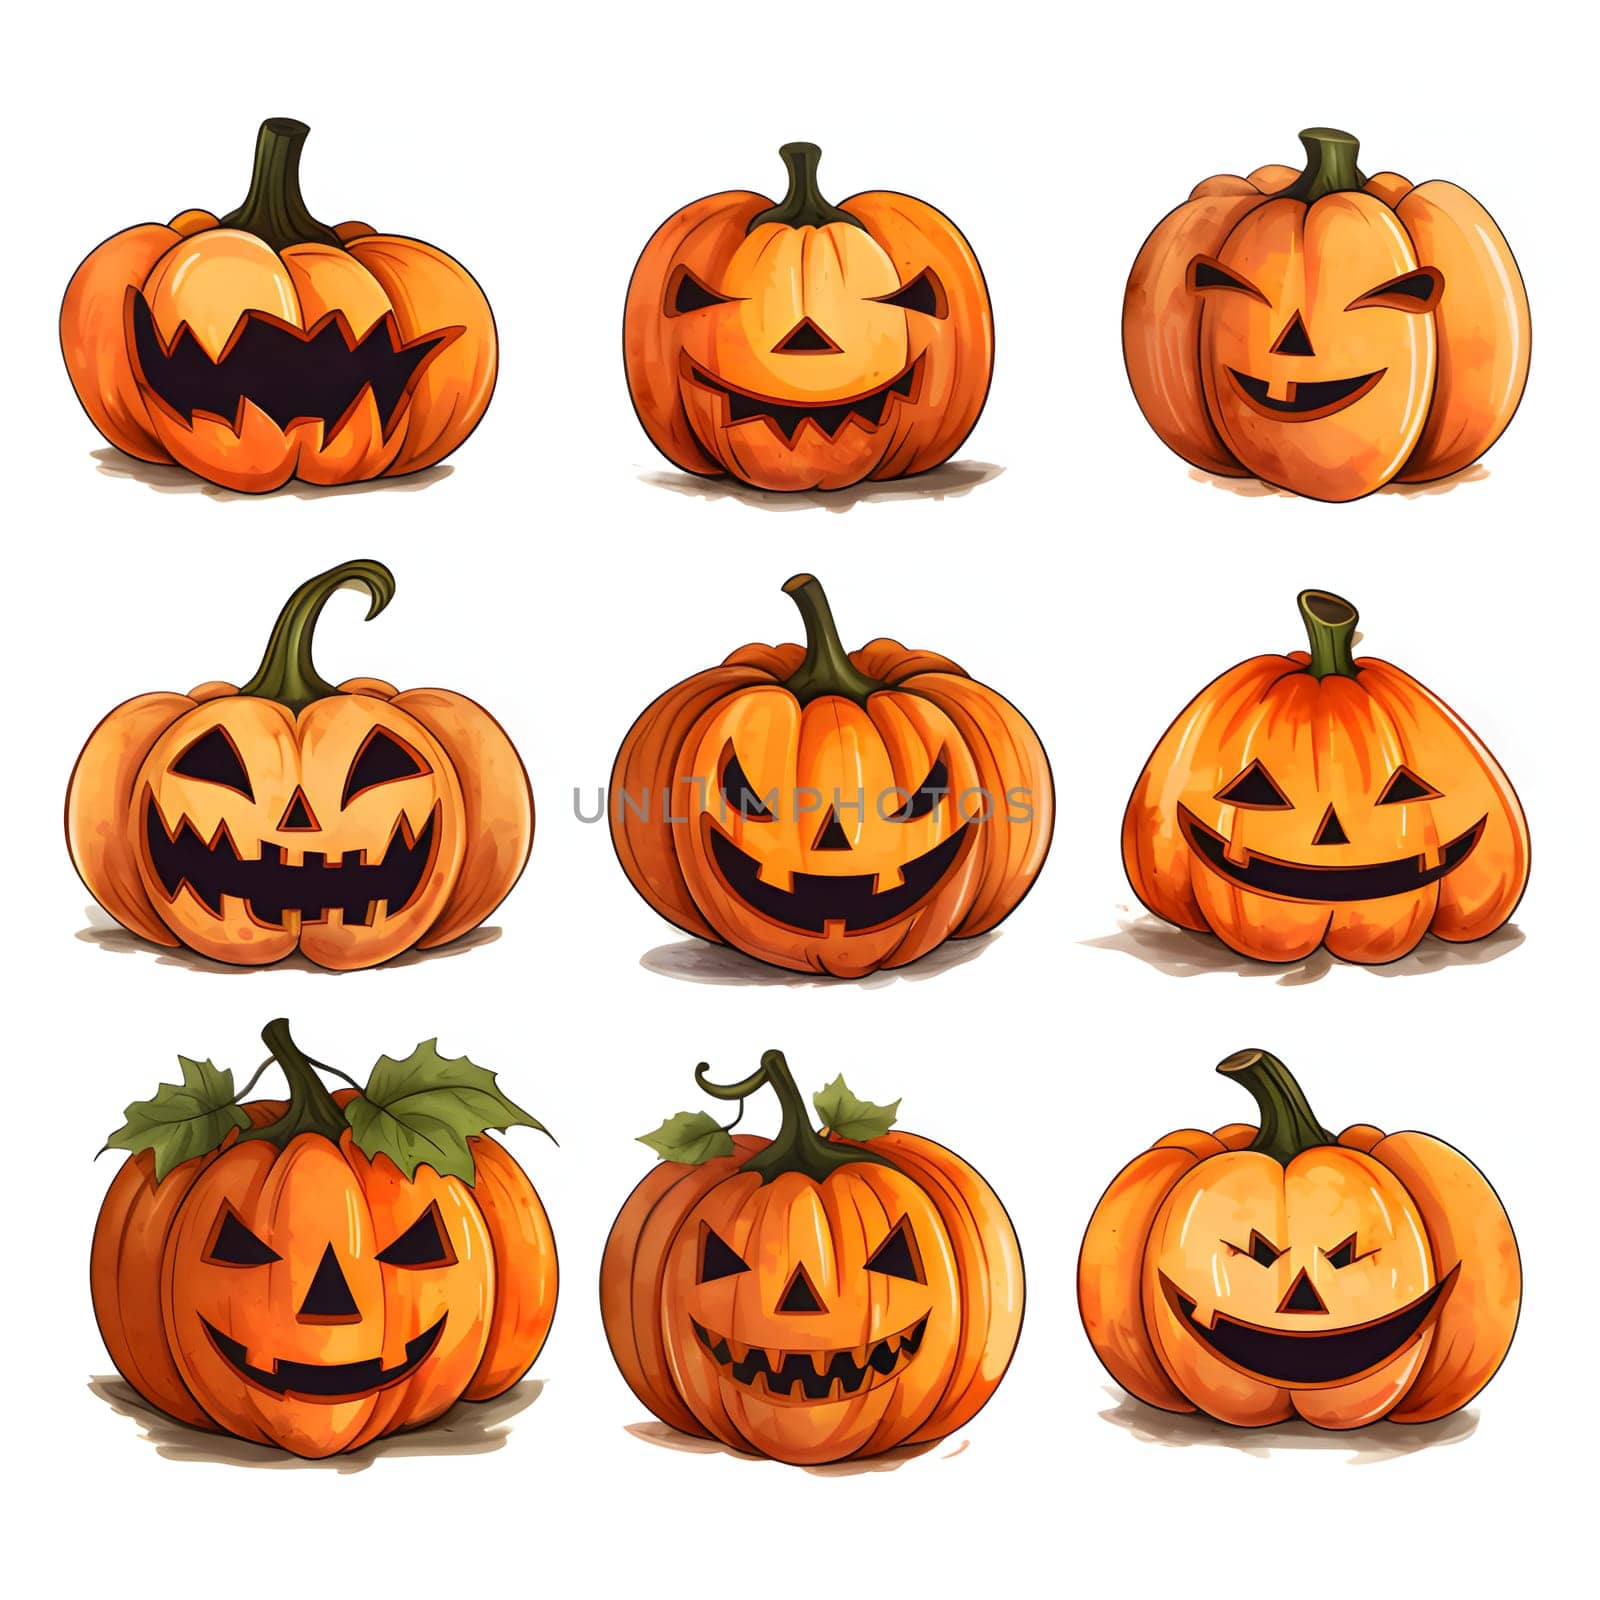 Nine different pumpkins to choose from, a Halloween image on a white isolated background. by ThemesS